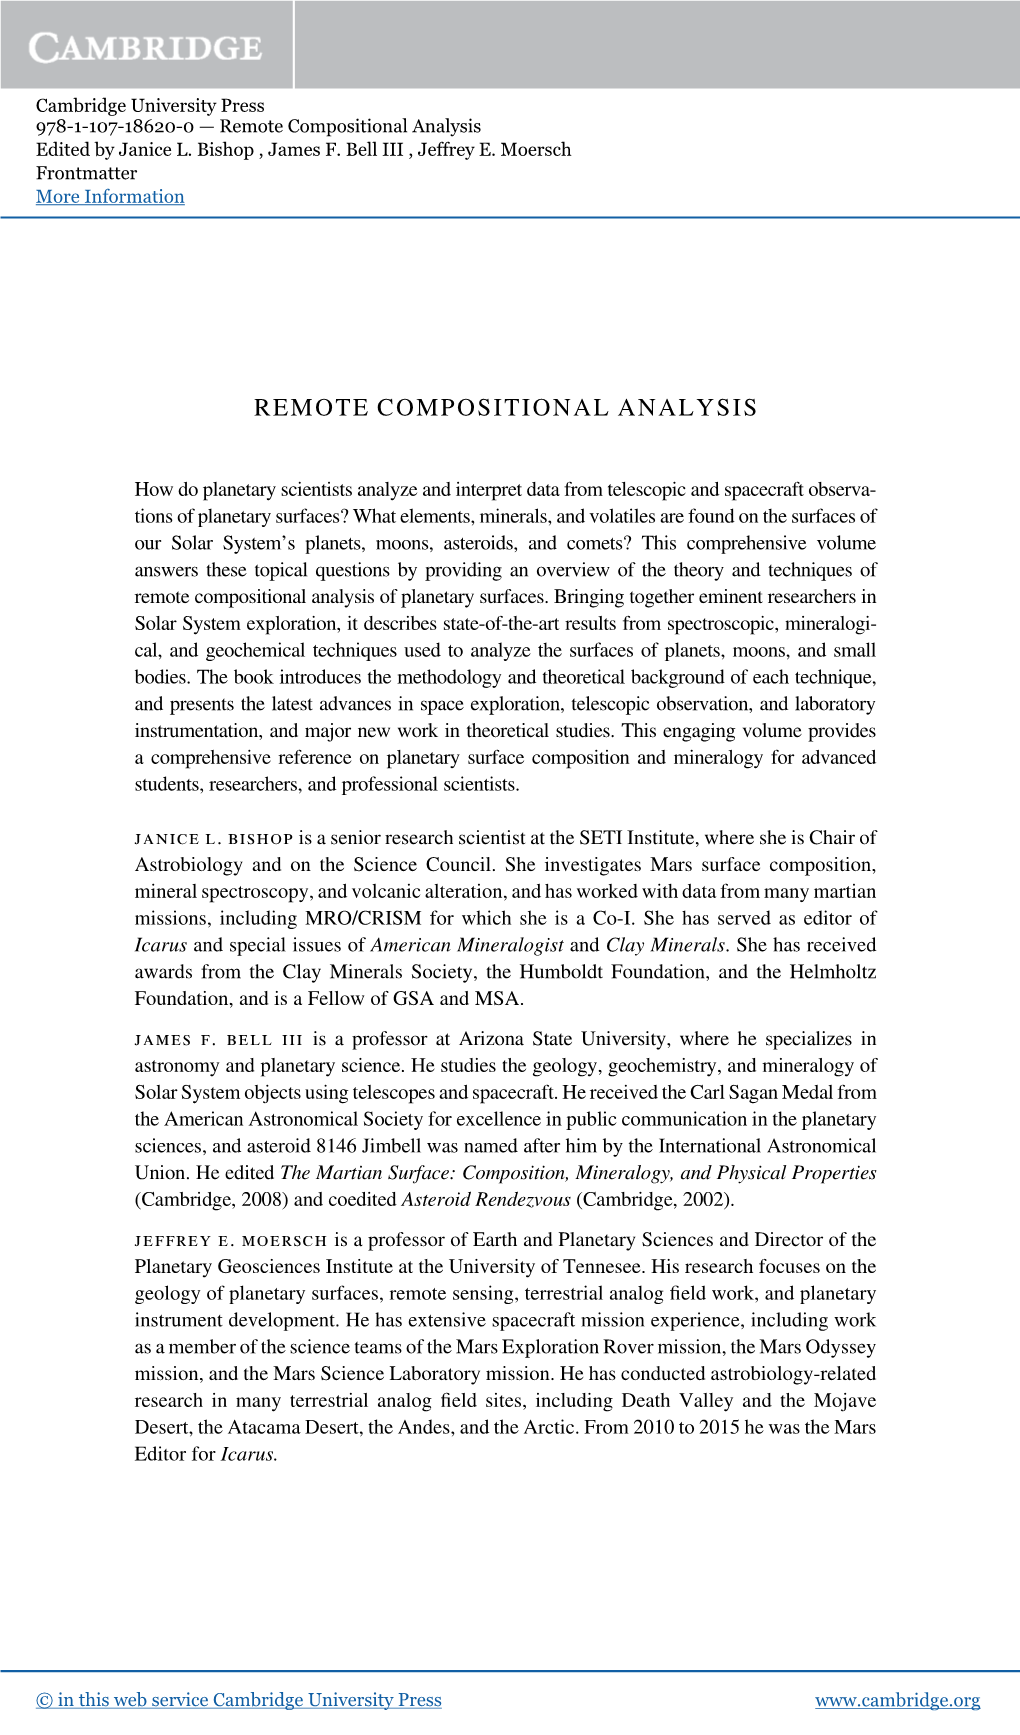 Remote Compositional Analysis Edited by Janice L